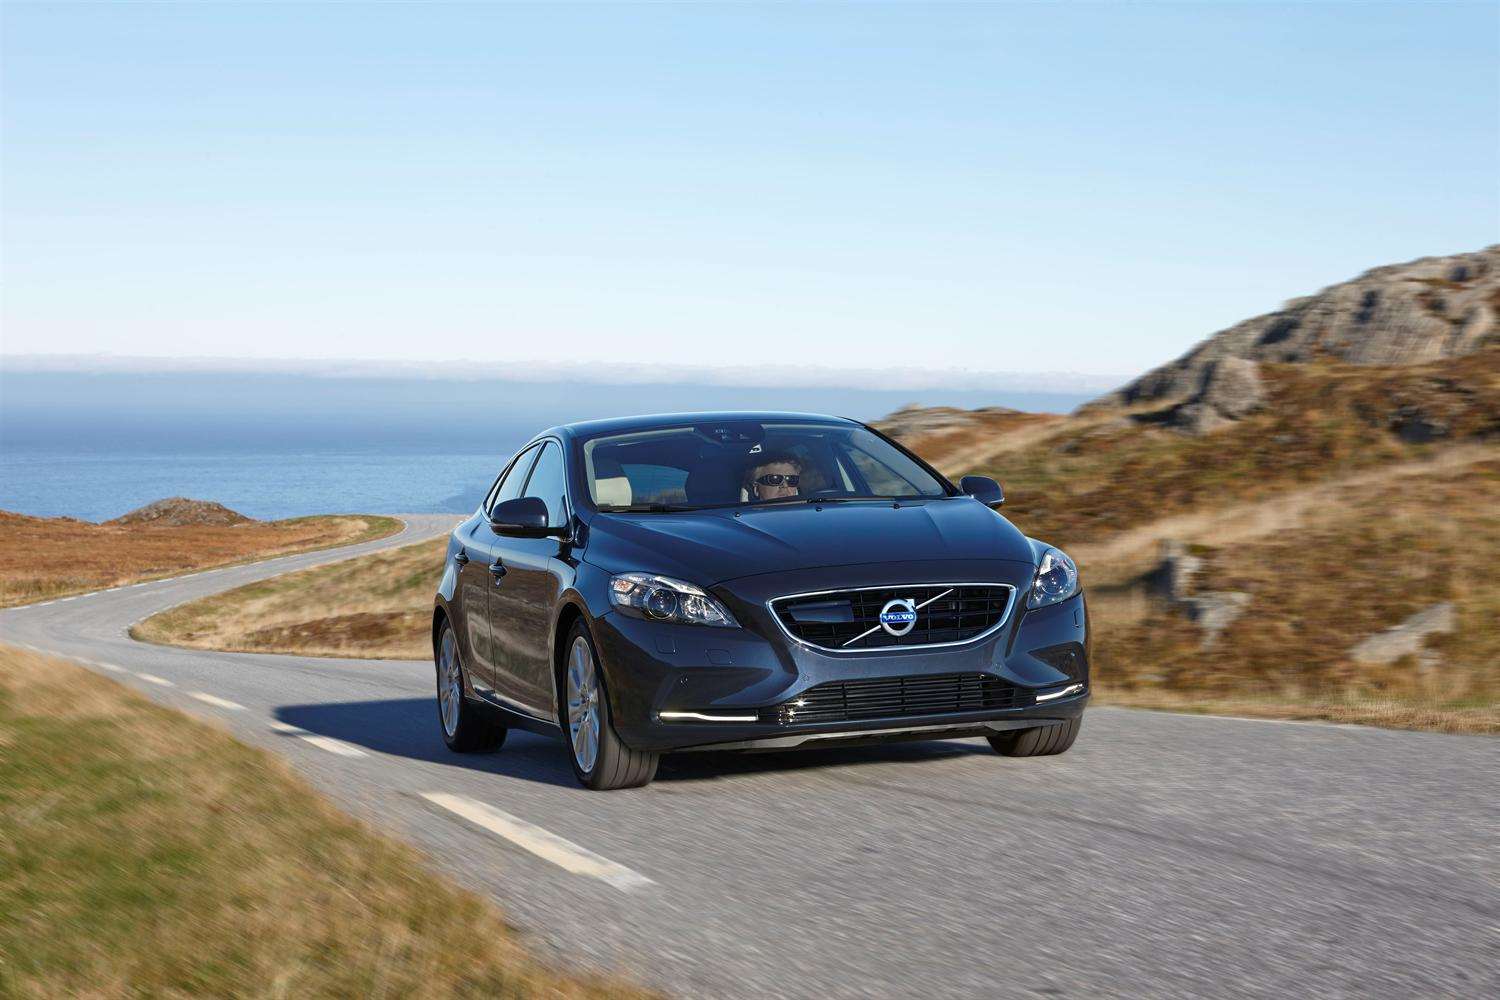 The Volvo V40 gives a great mpg return